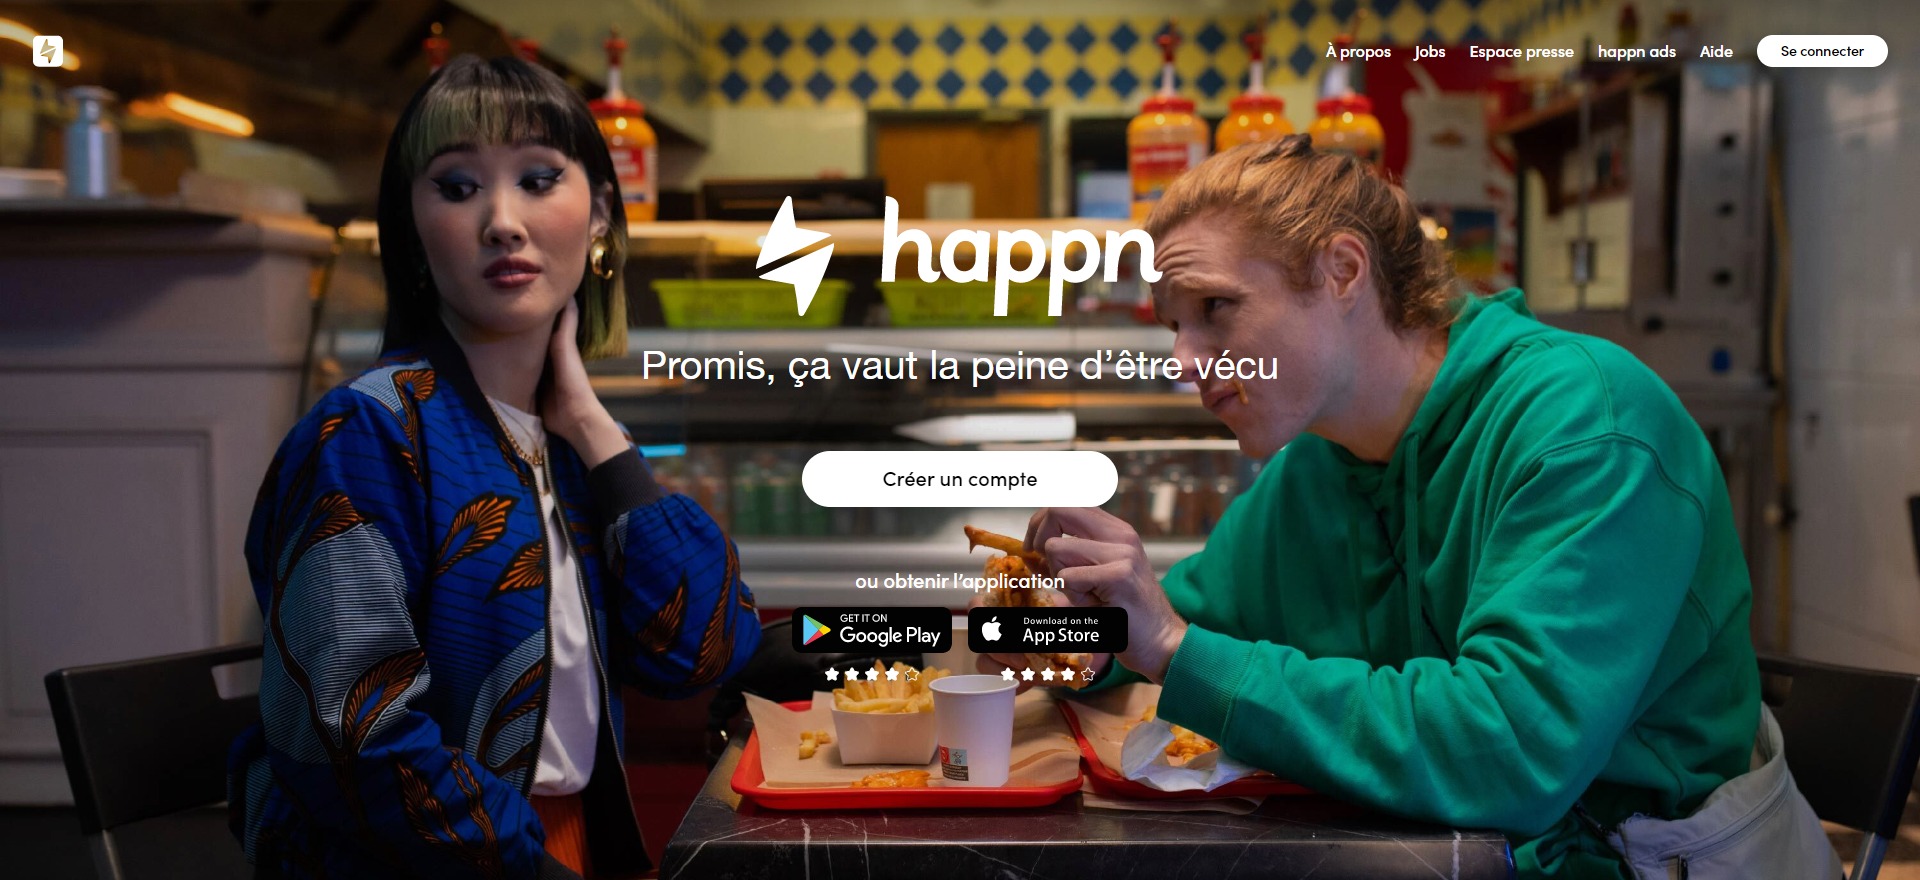 Happn: My opinion and everything you need to know